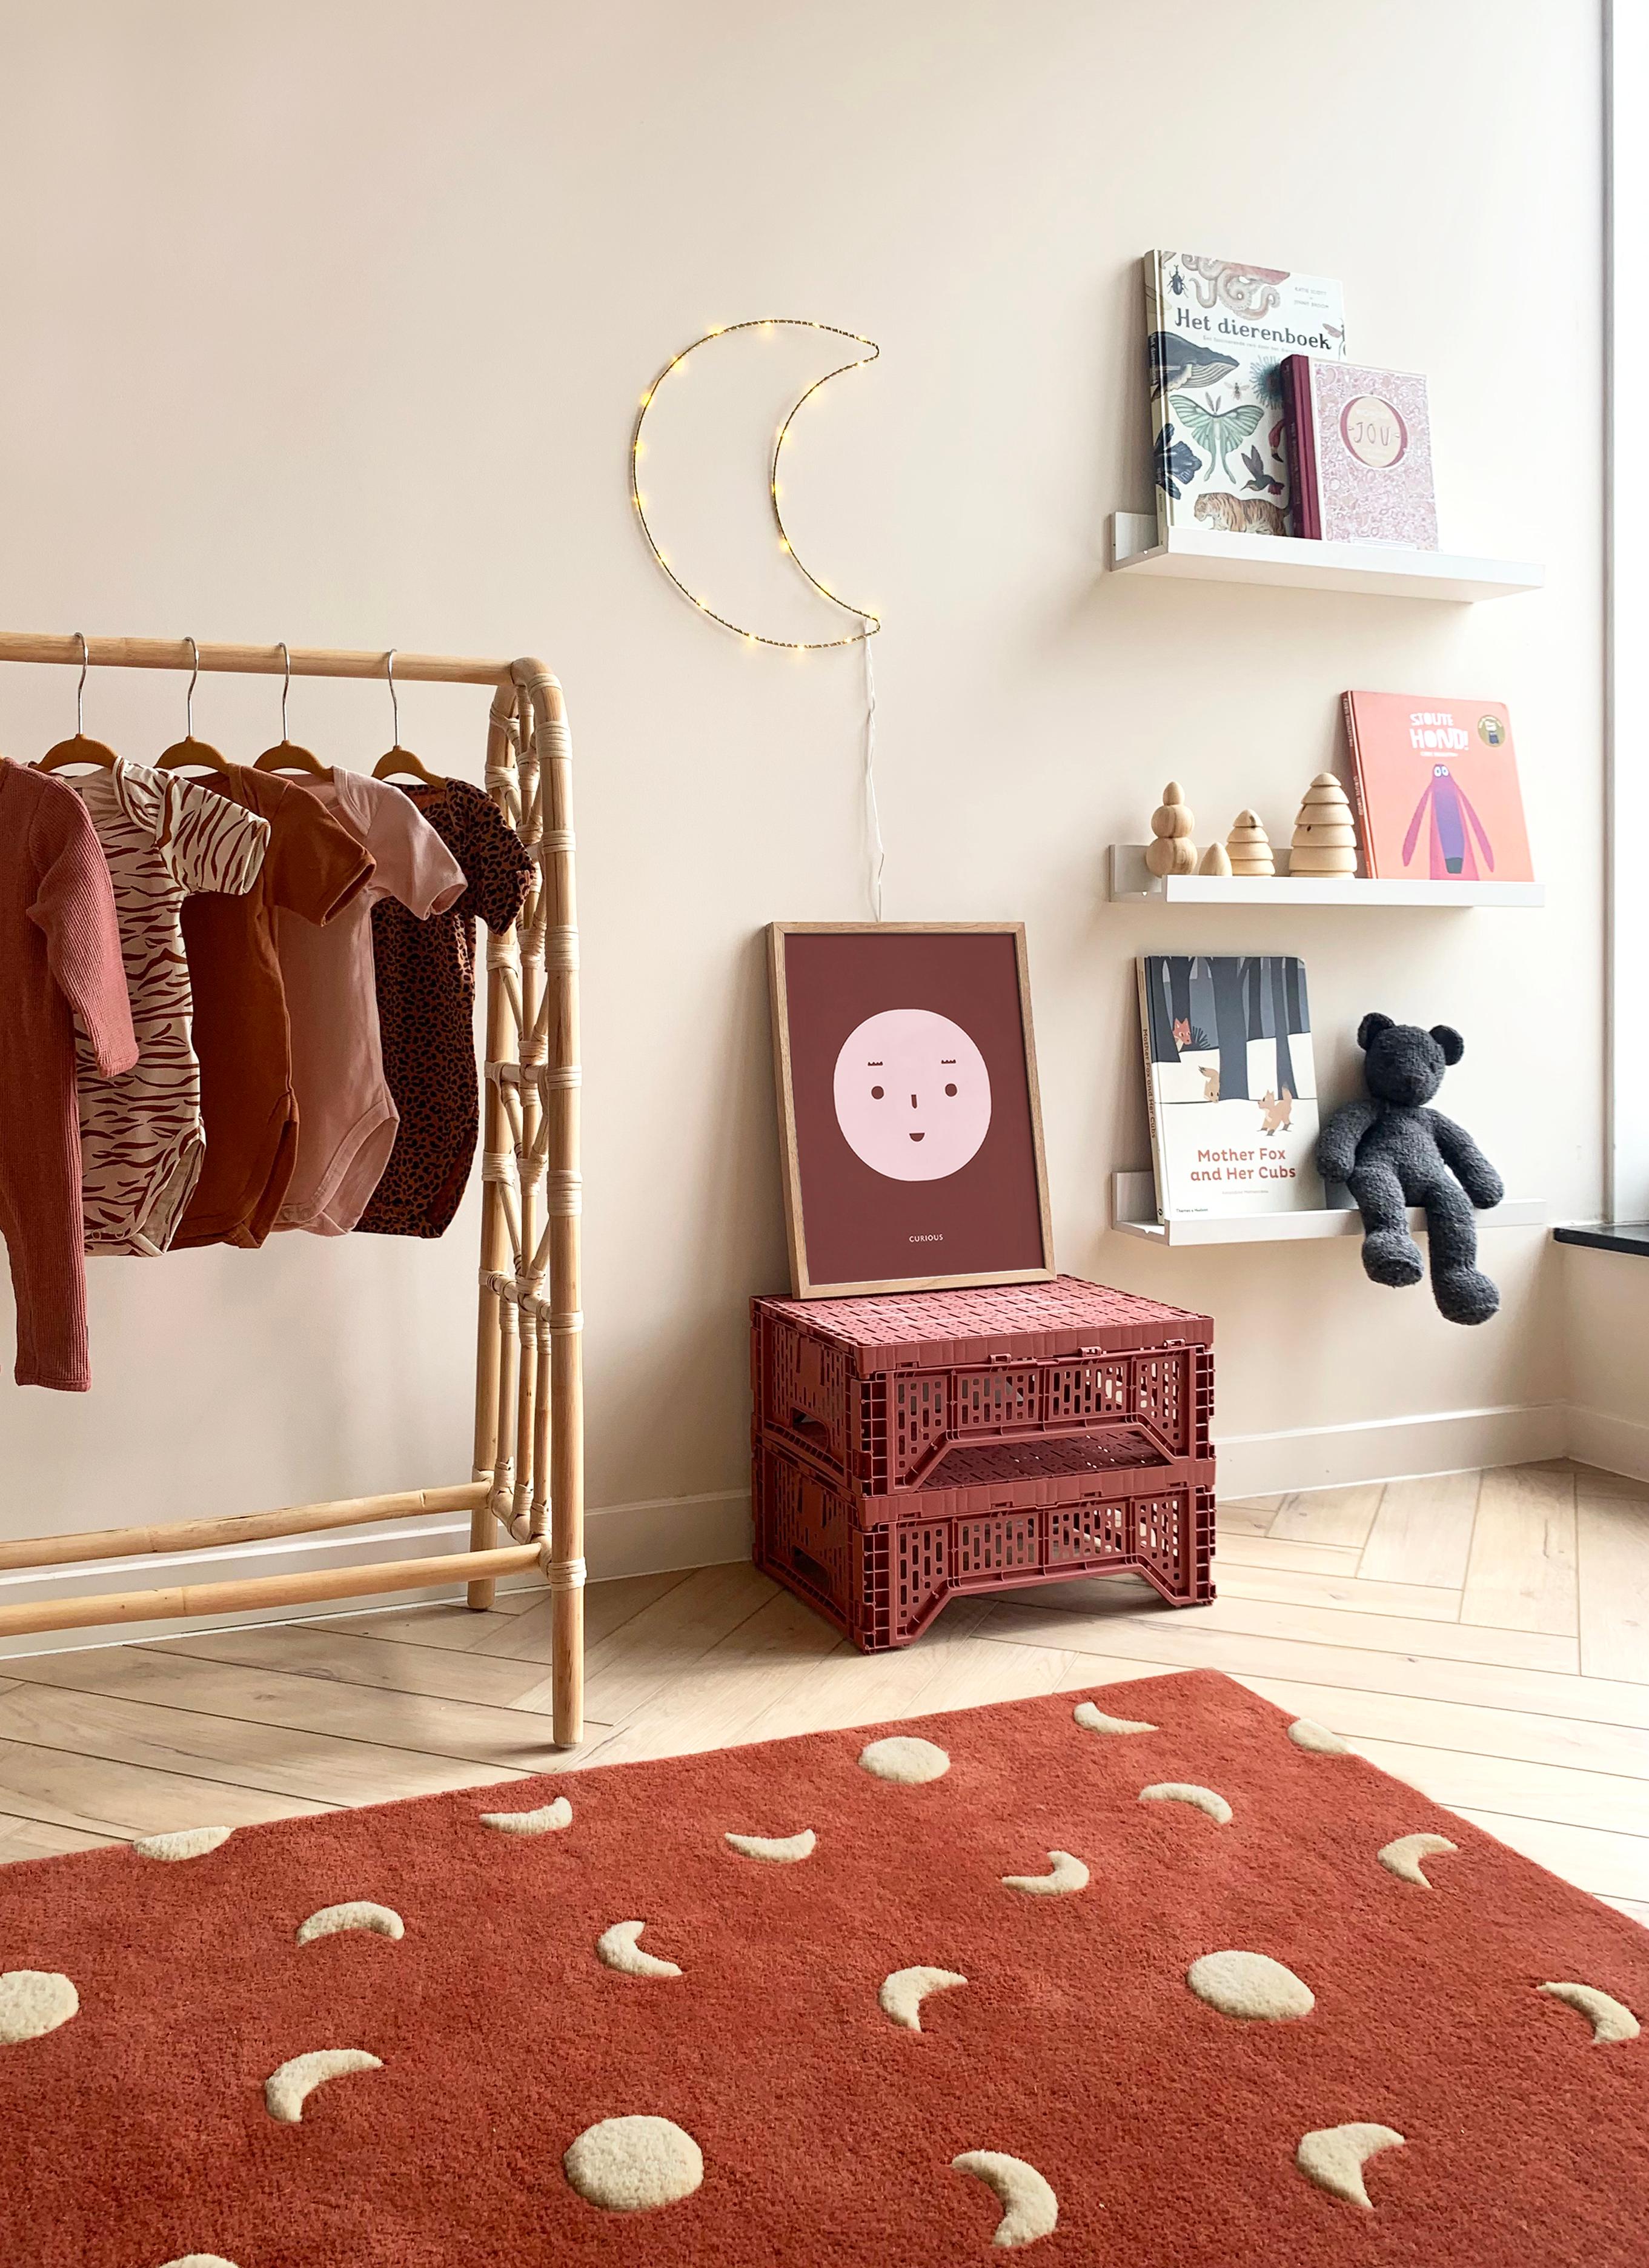 The Moons Rug Brick Red 80 x 120 cm is a wool rectangle rug with an all over moon pattern. The moons are hand-tufted in a higher pile so they pop out of the rug. This beautiful strong personality rug gives your room character and uniqueness. The